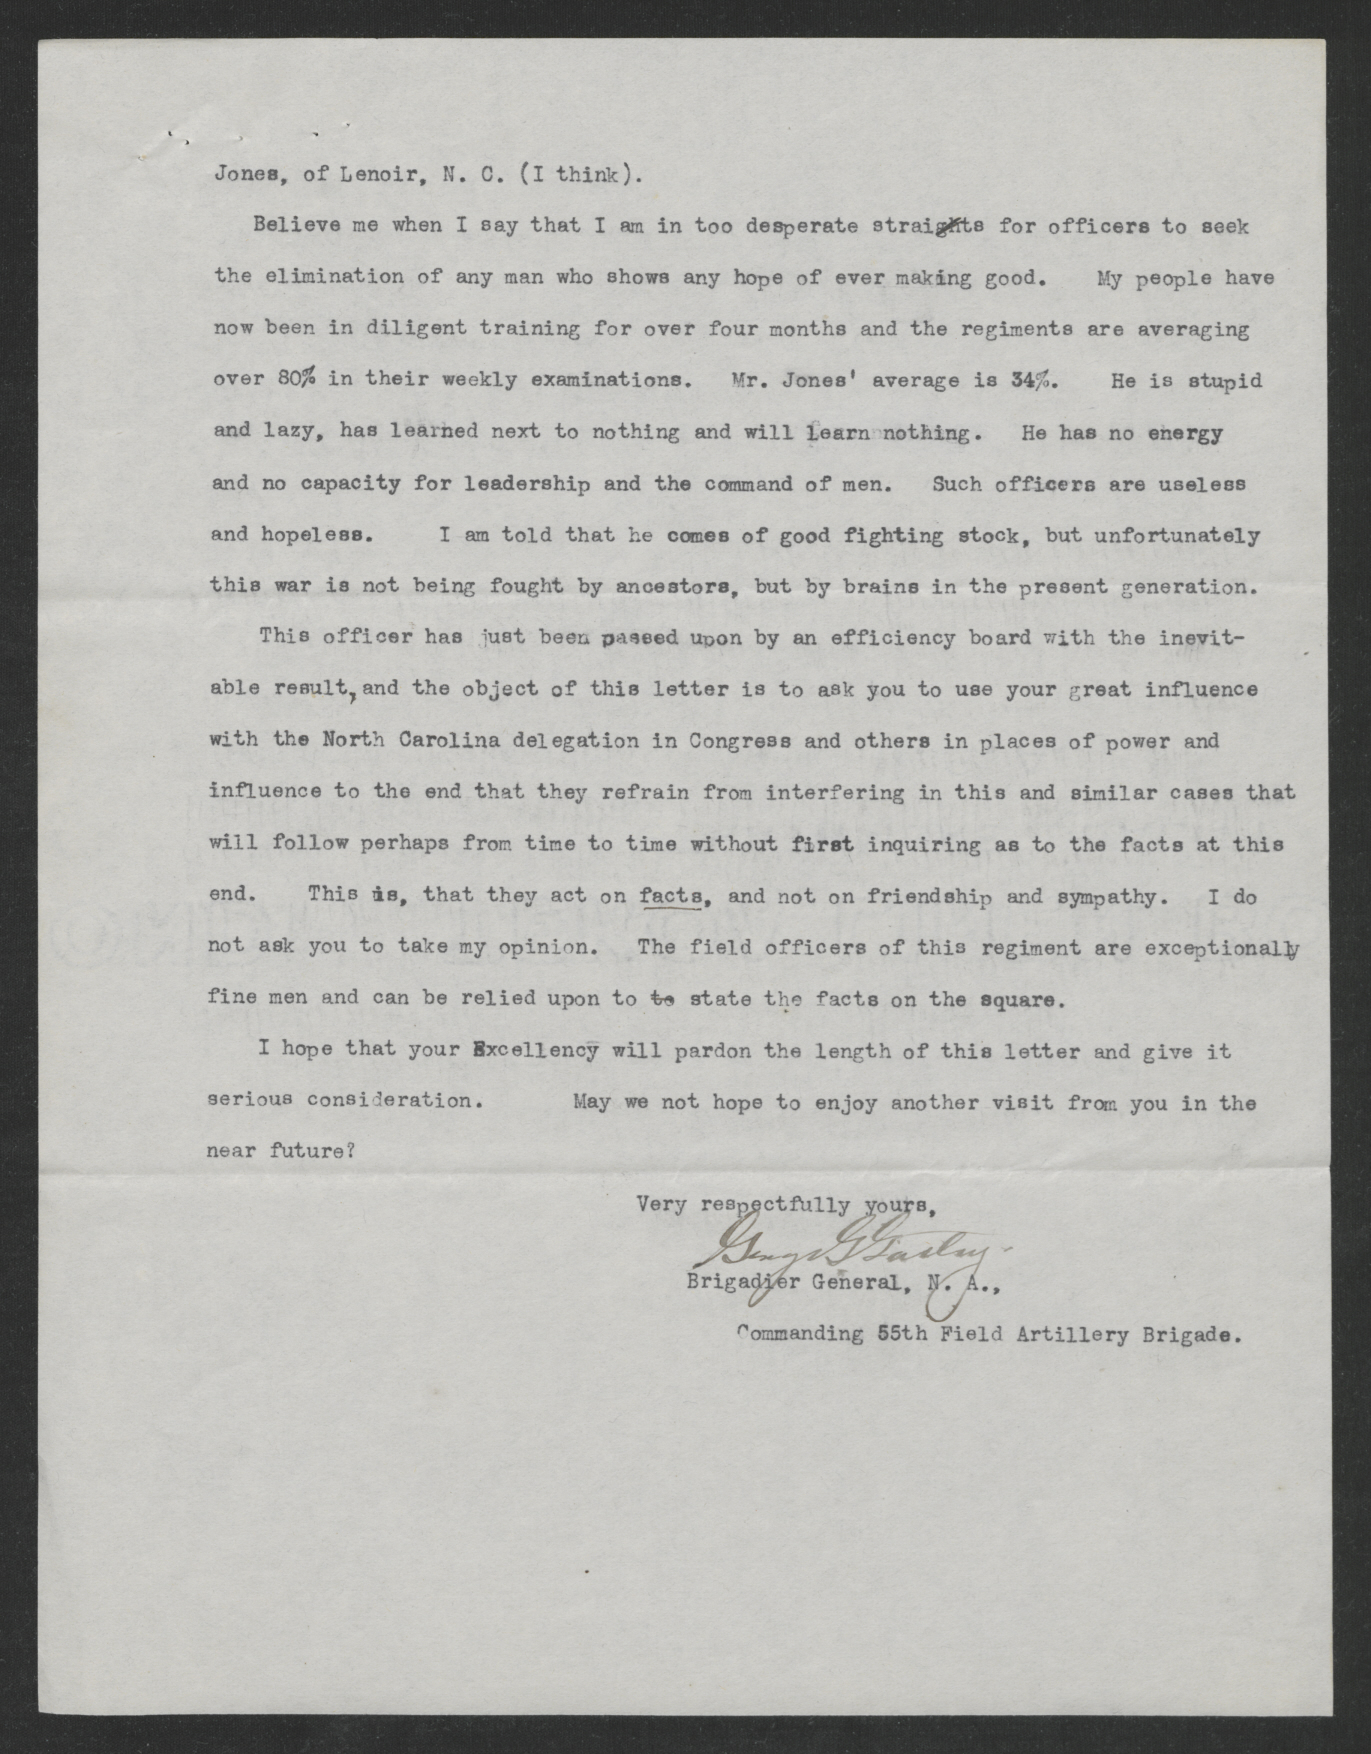 Letter from George G. Gatley to Thomas W. Bickett, January 27, 1918, page 2